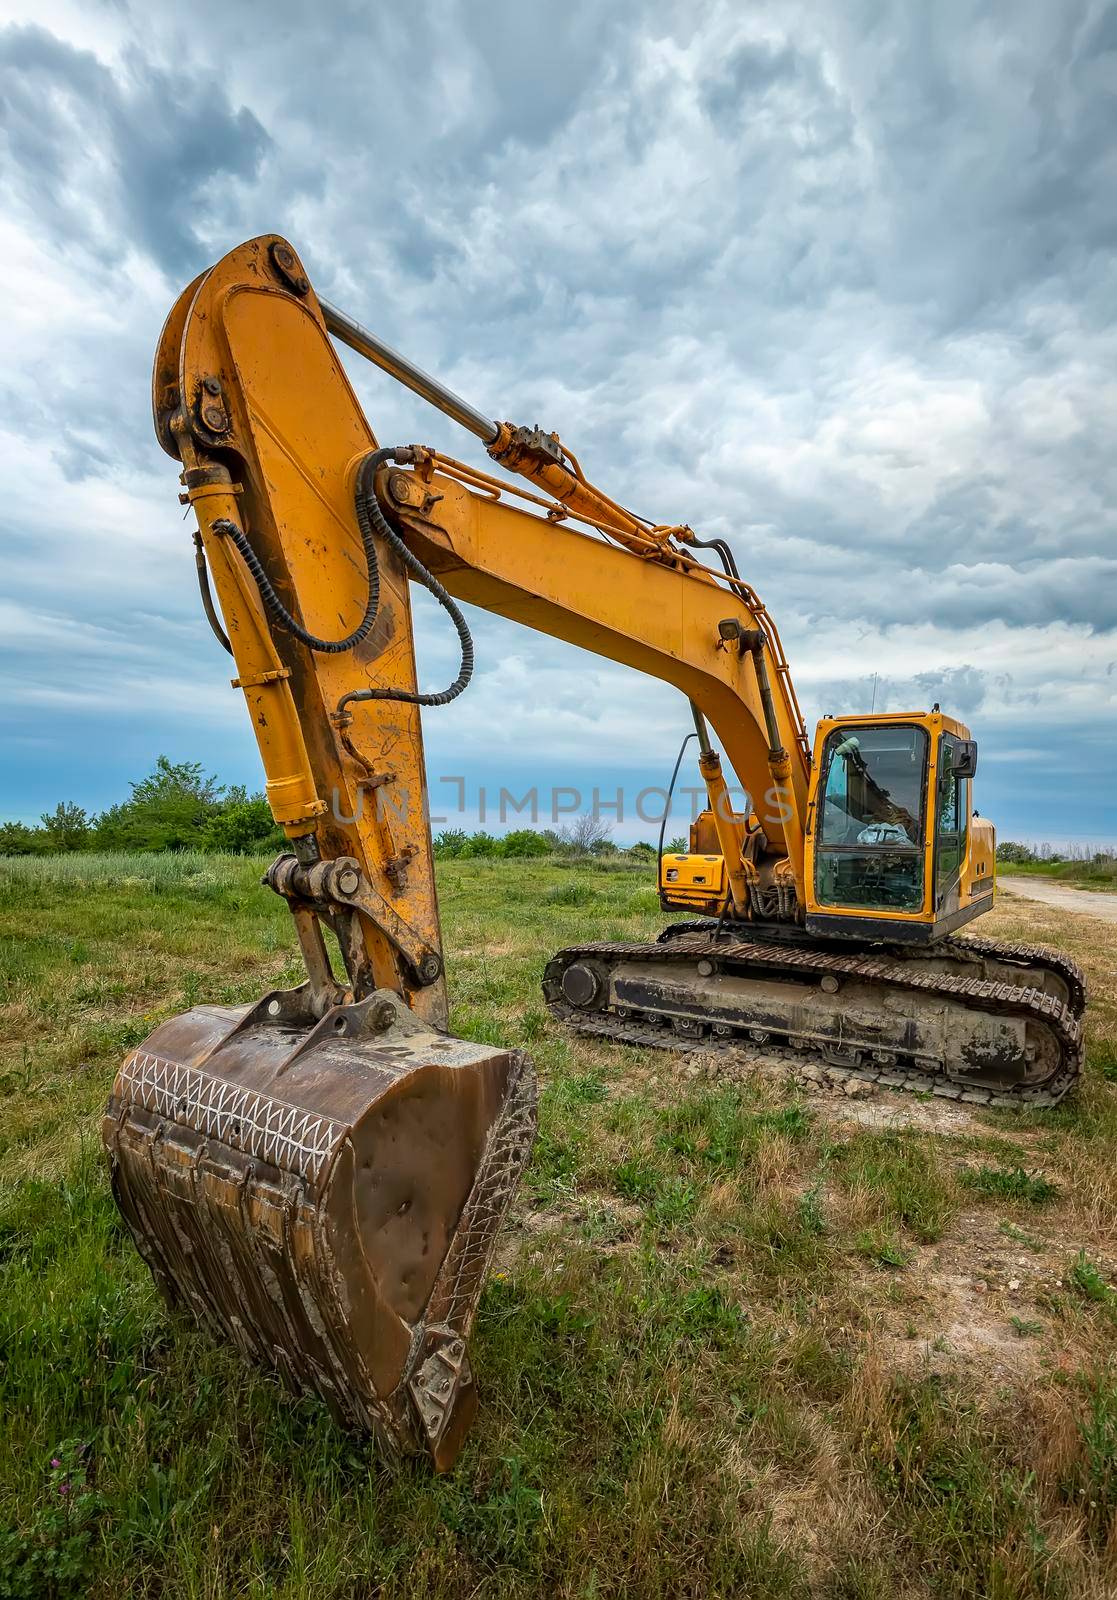 A parked yellow excavator on a meadow at sunset by EdVal